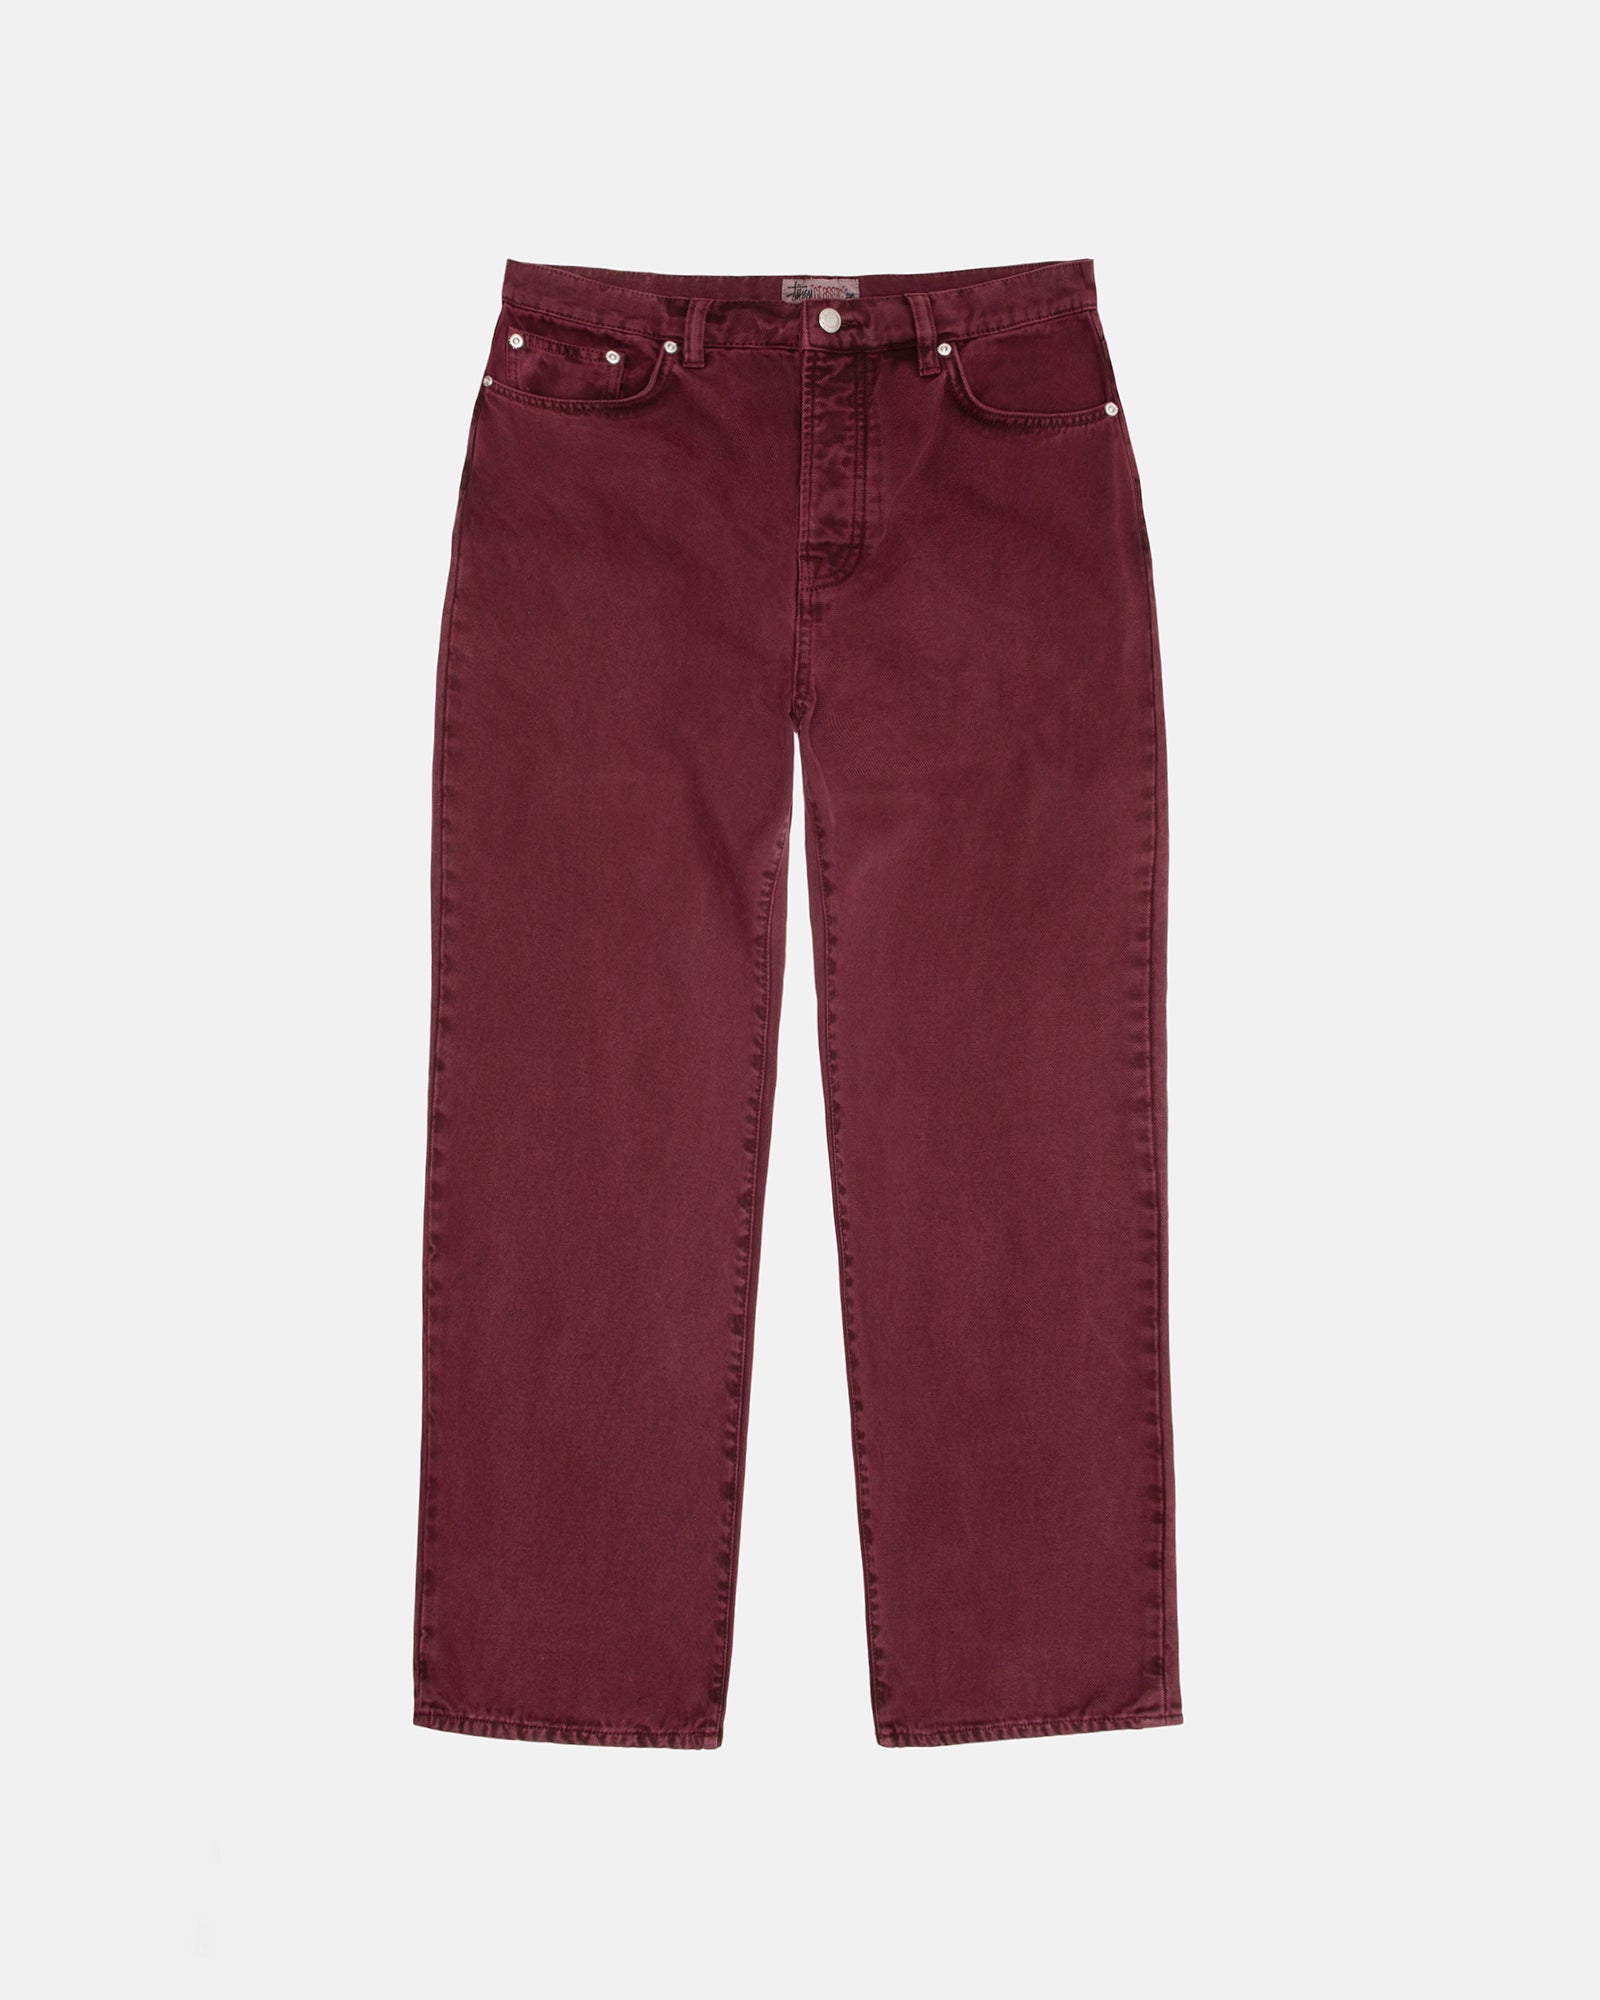 STÜSSY CLASSIC JEAN WASHED CANVAS WINE PANTS